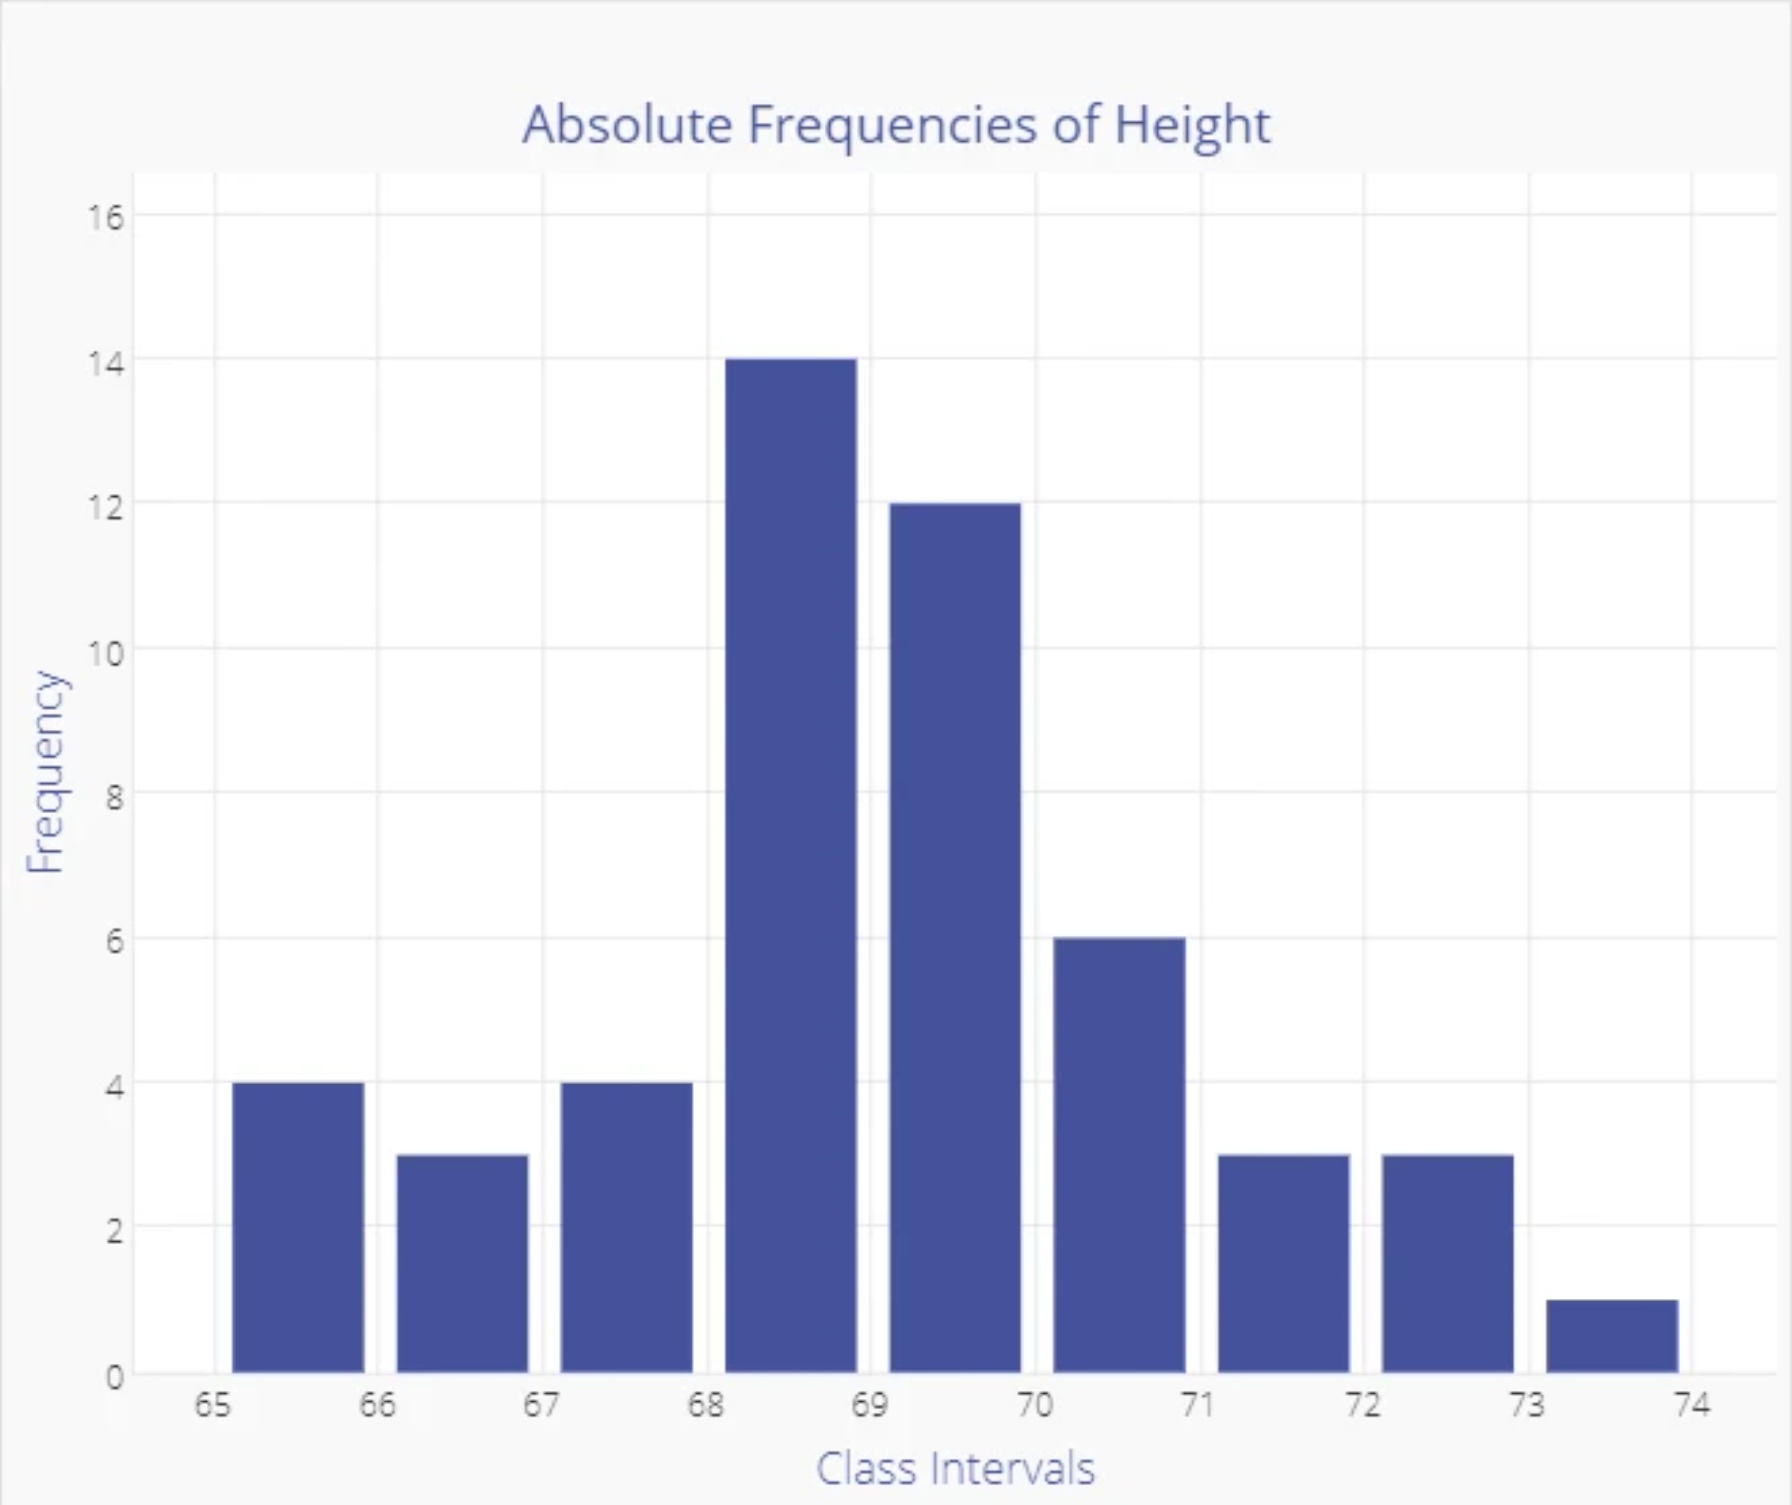 Absolute Frequencies of Height Table -- Highest Frequency at interval 69/70